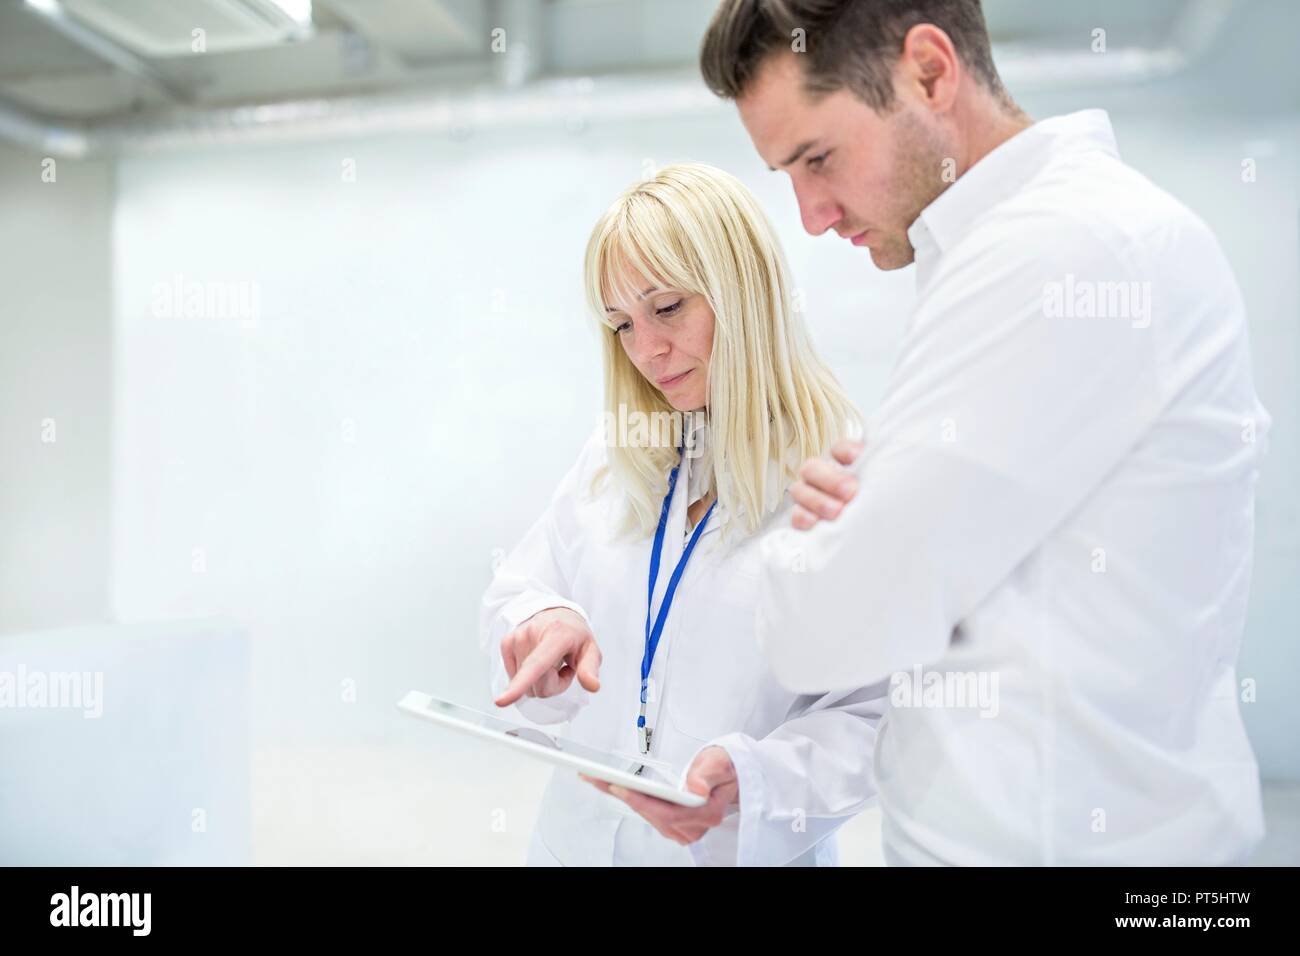 Female doctor discussing medical notes on digital tablet with consultant. Stock Photo